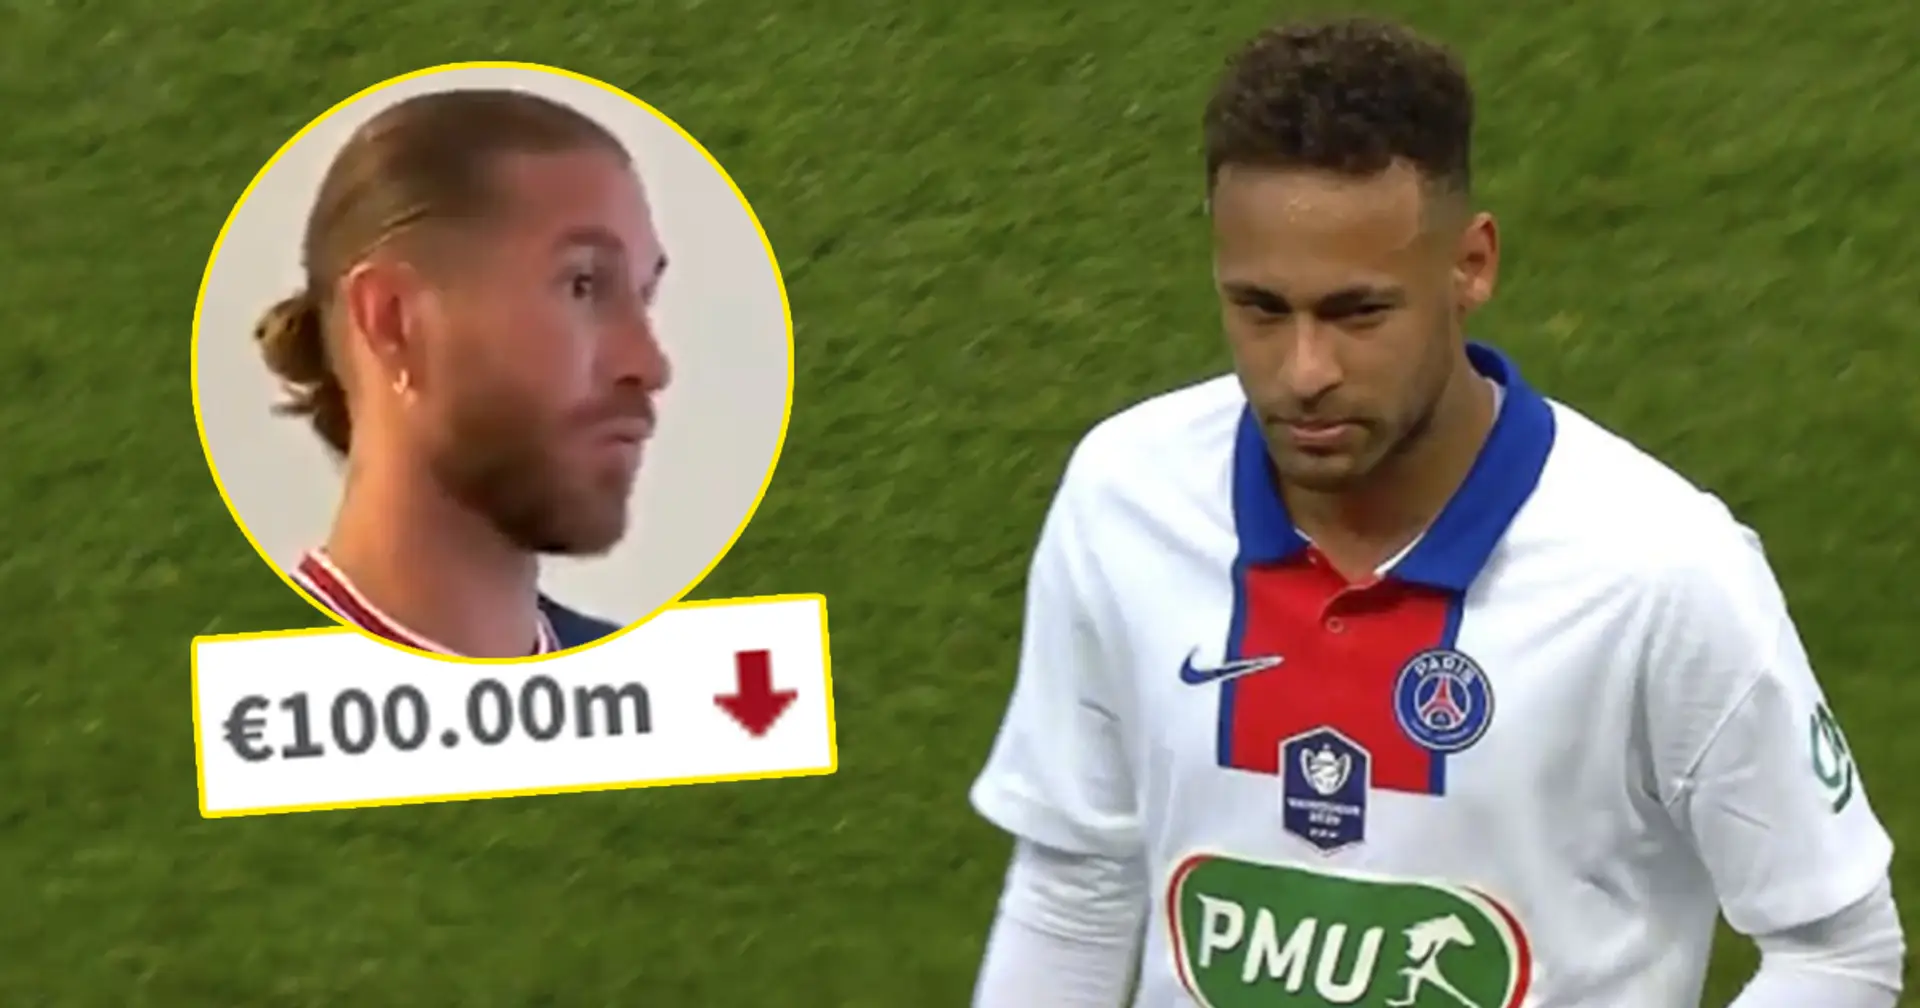 9 PSG players who've decreased and 6 players who've increased in market value